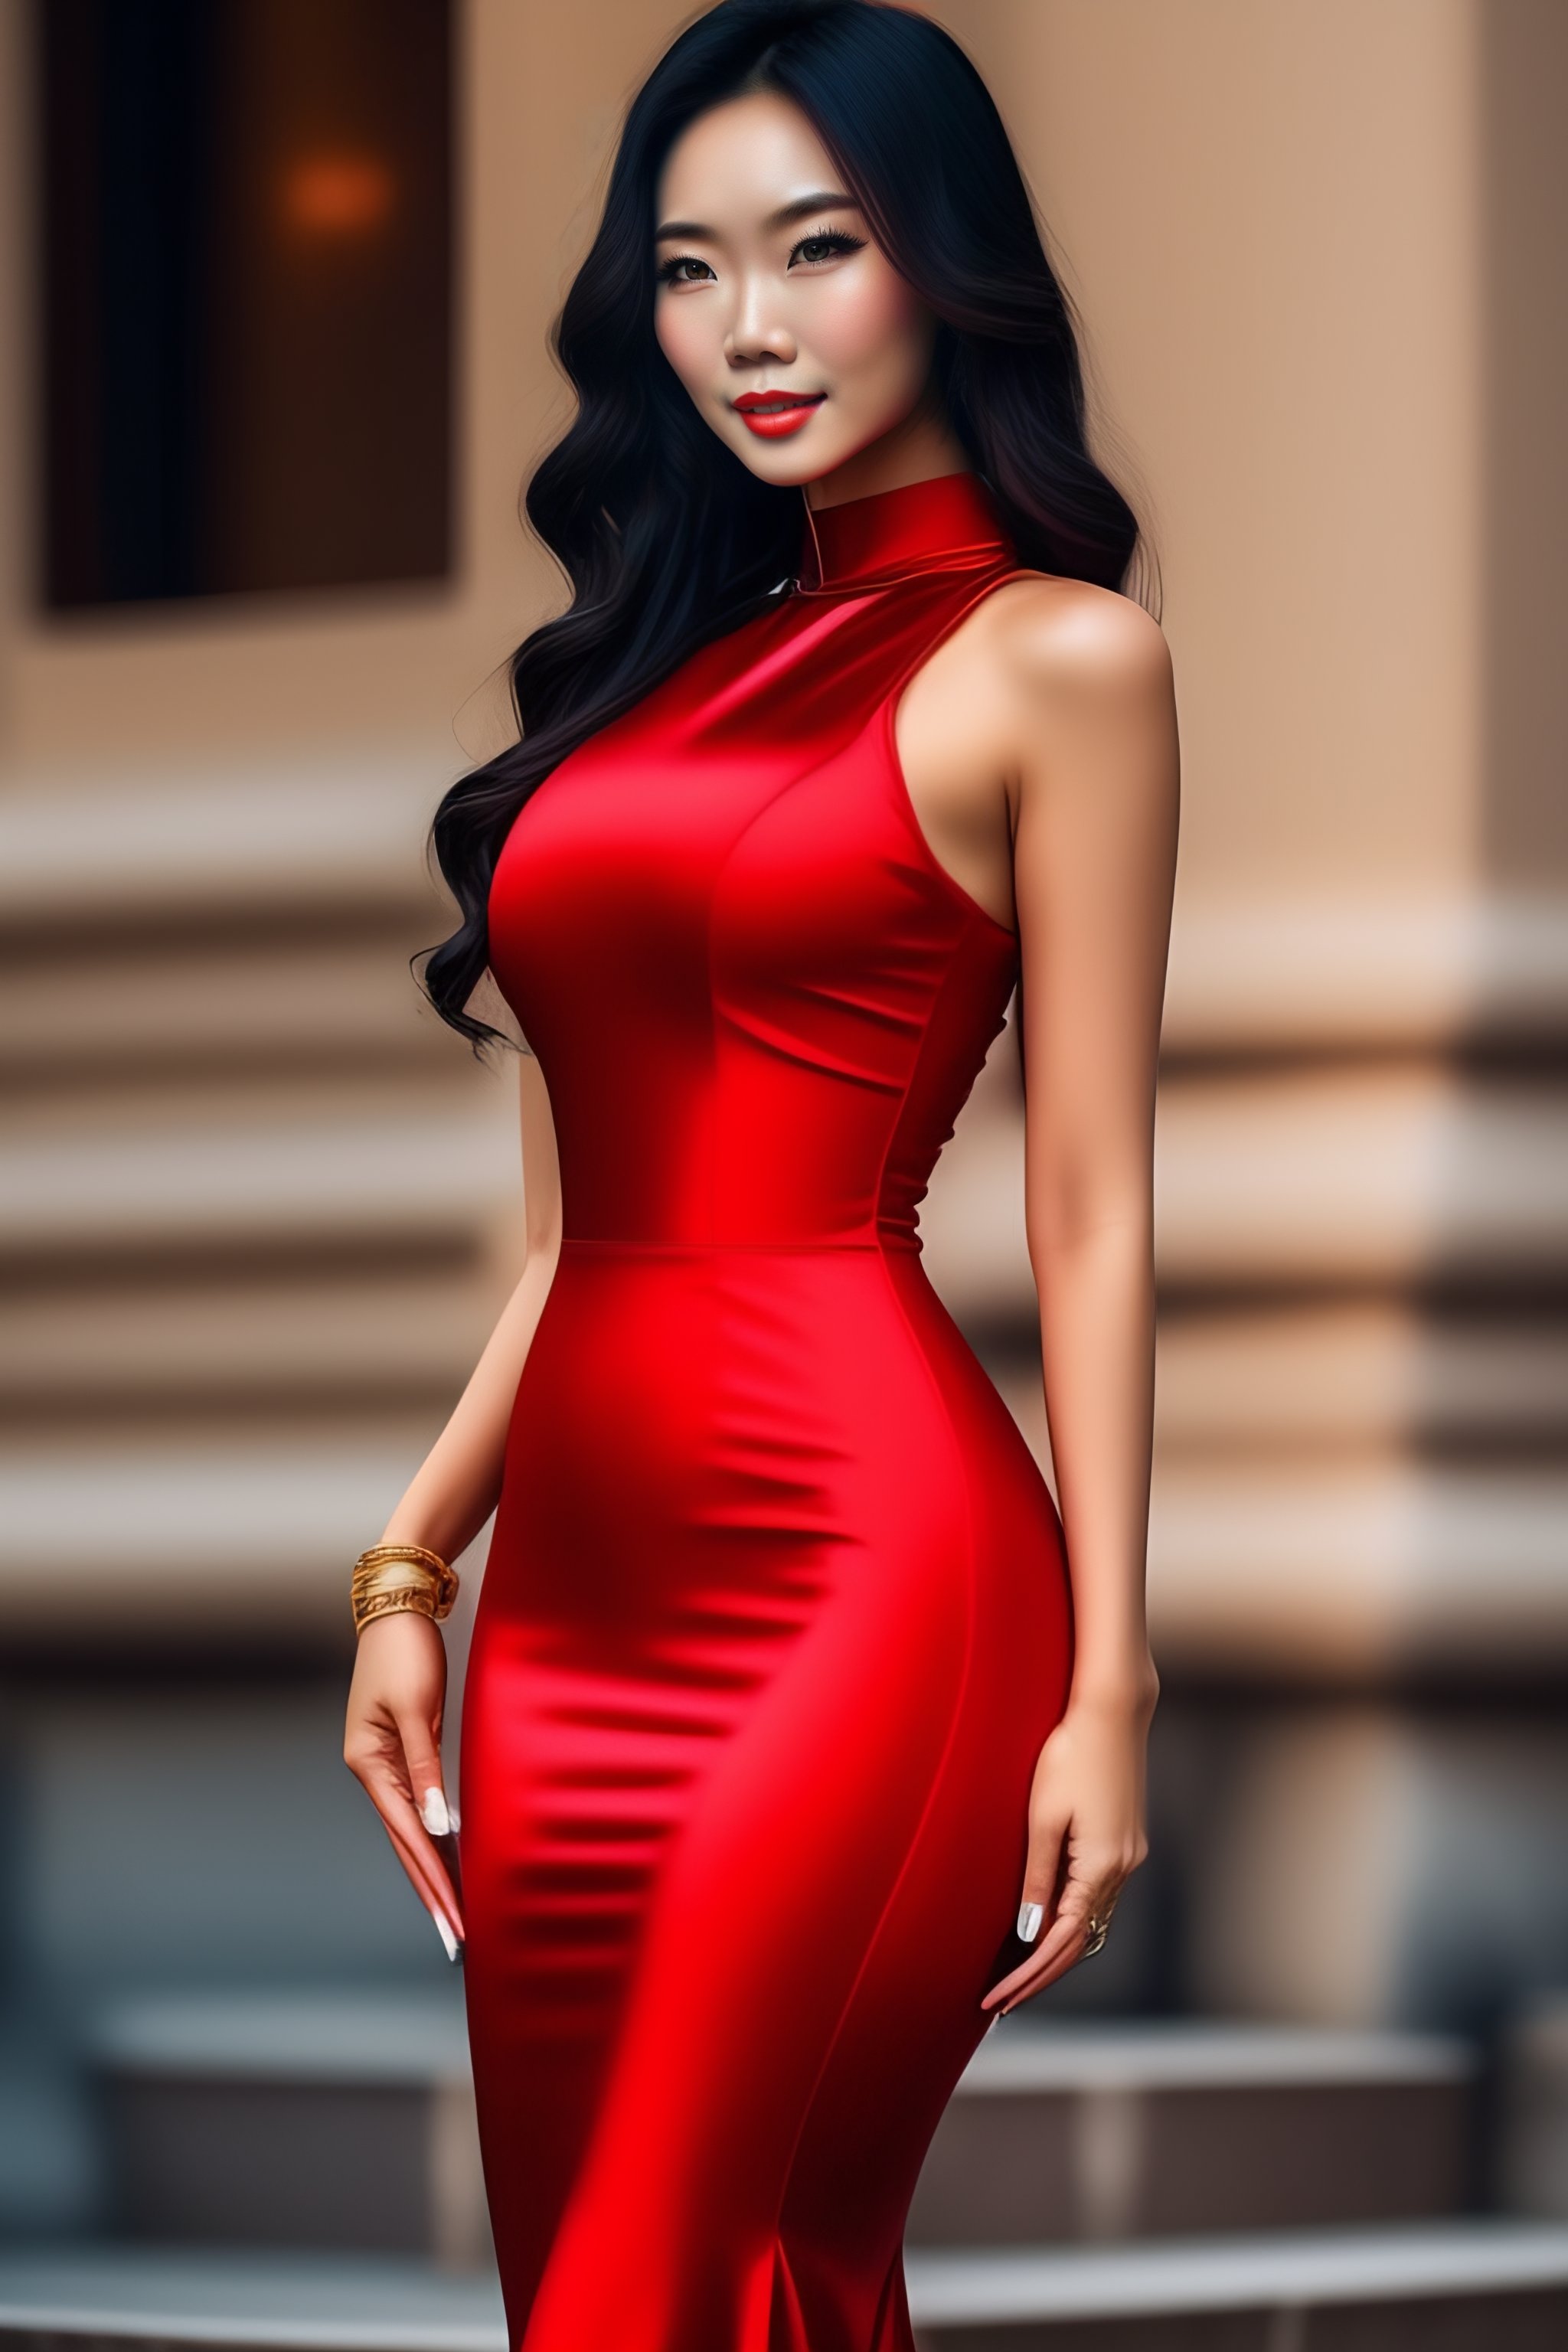 Lexica - Sexy asian woman in tight red dress, slim figure